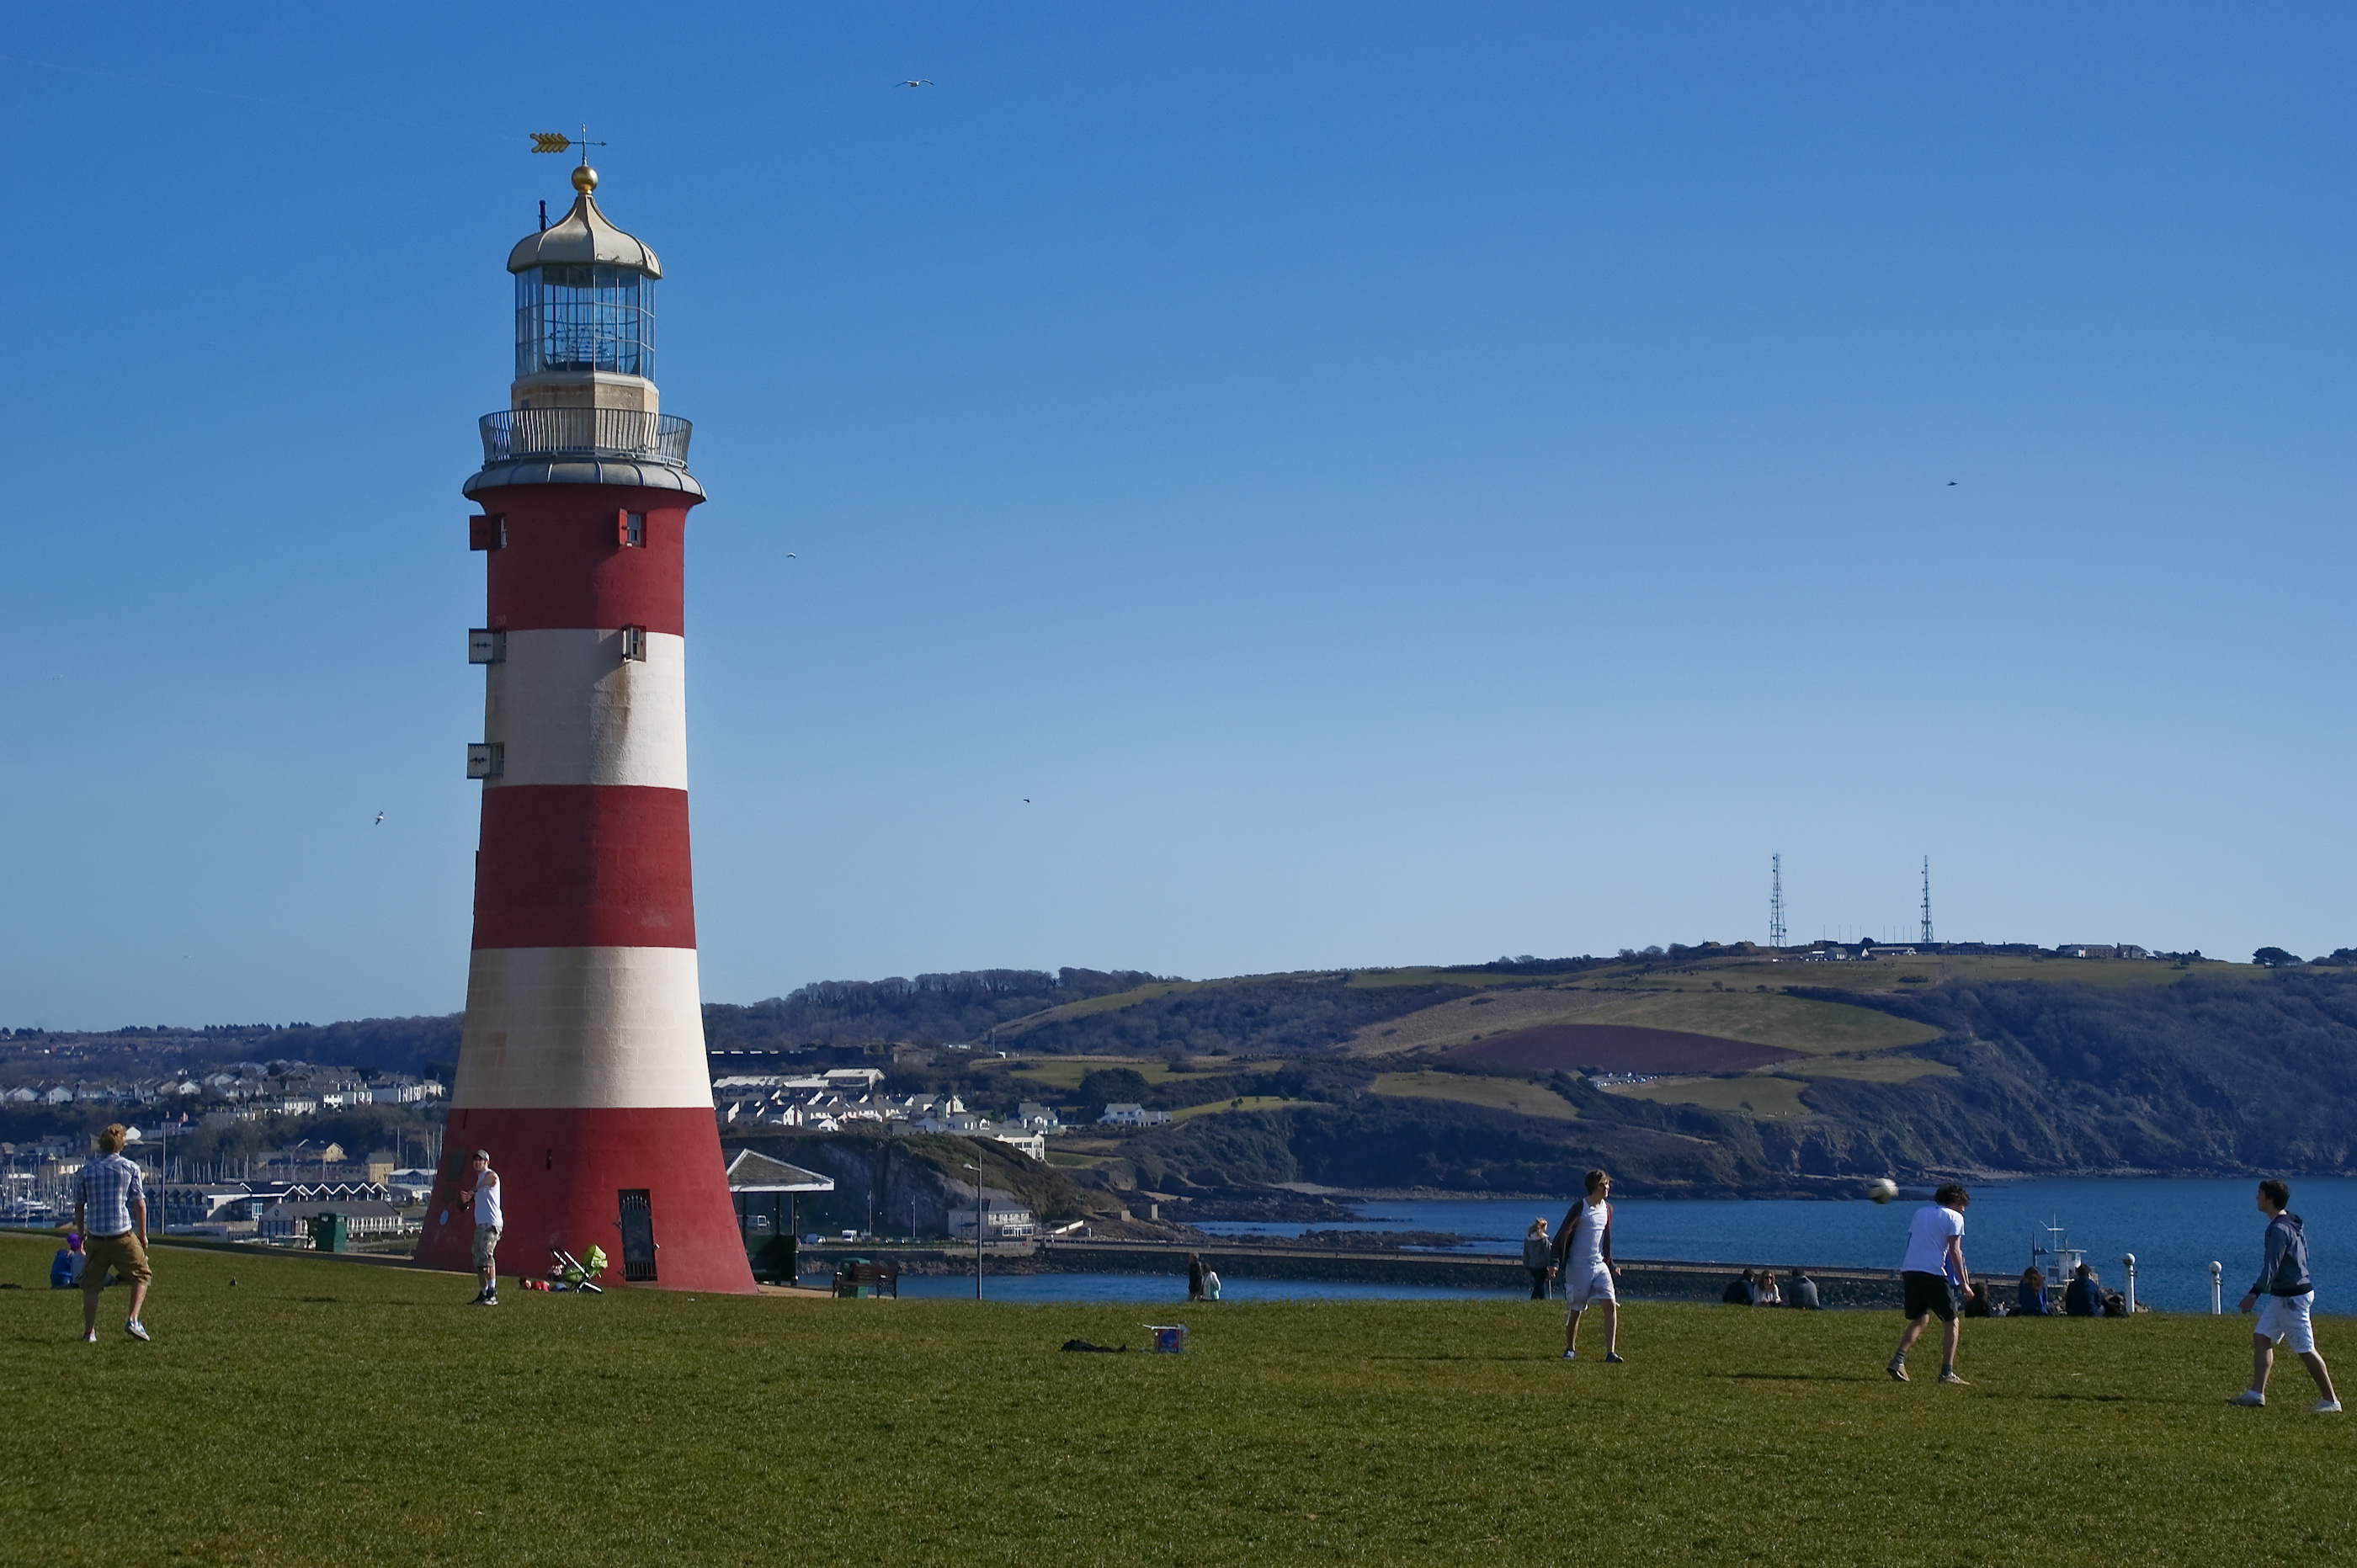 Plymouth hoe photo